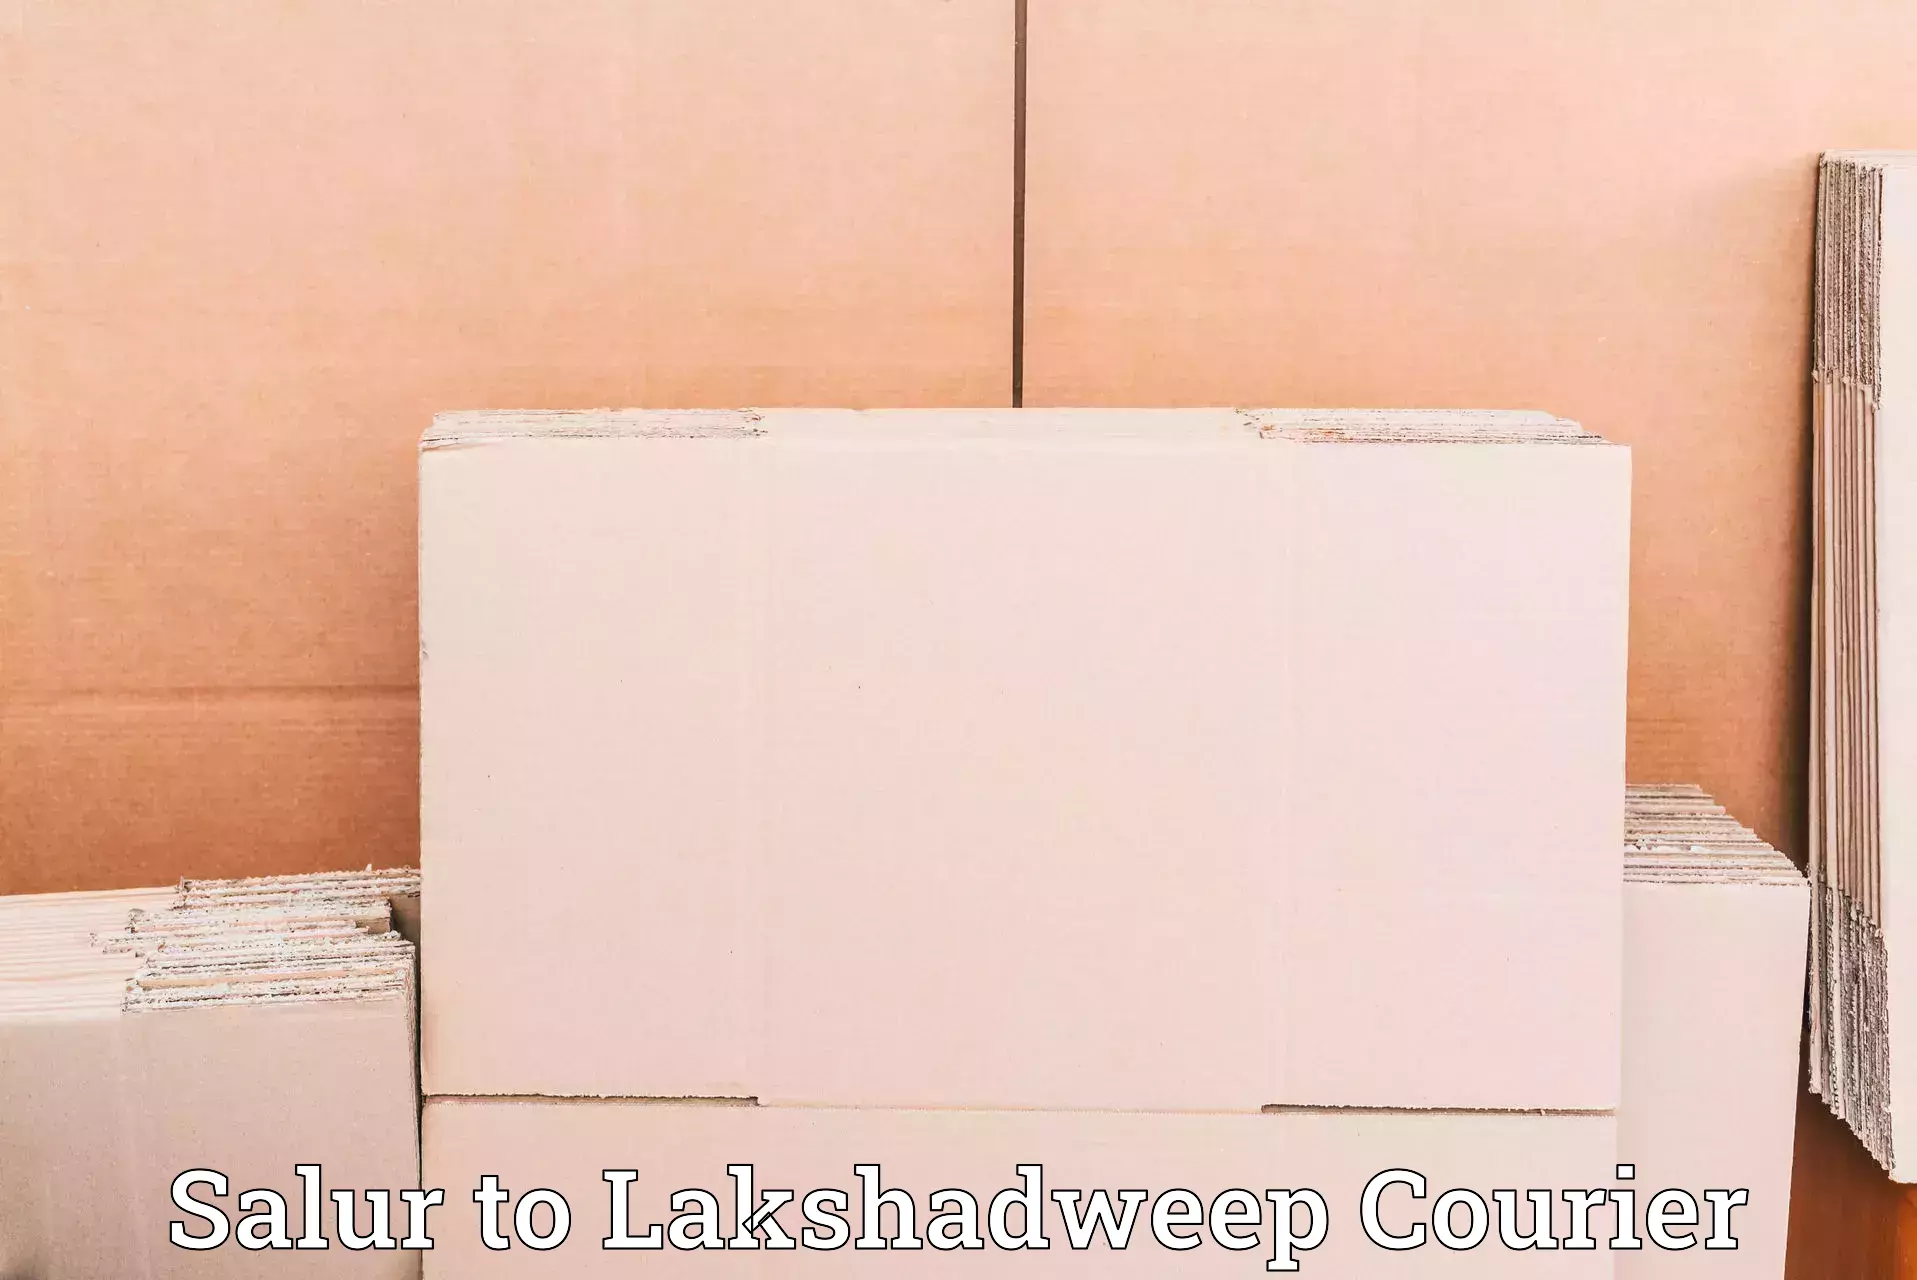 Customer-friendly courier services Salur to Lakshadweep